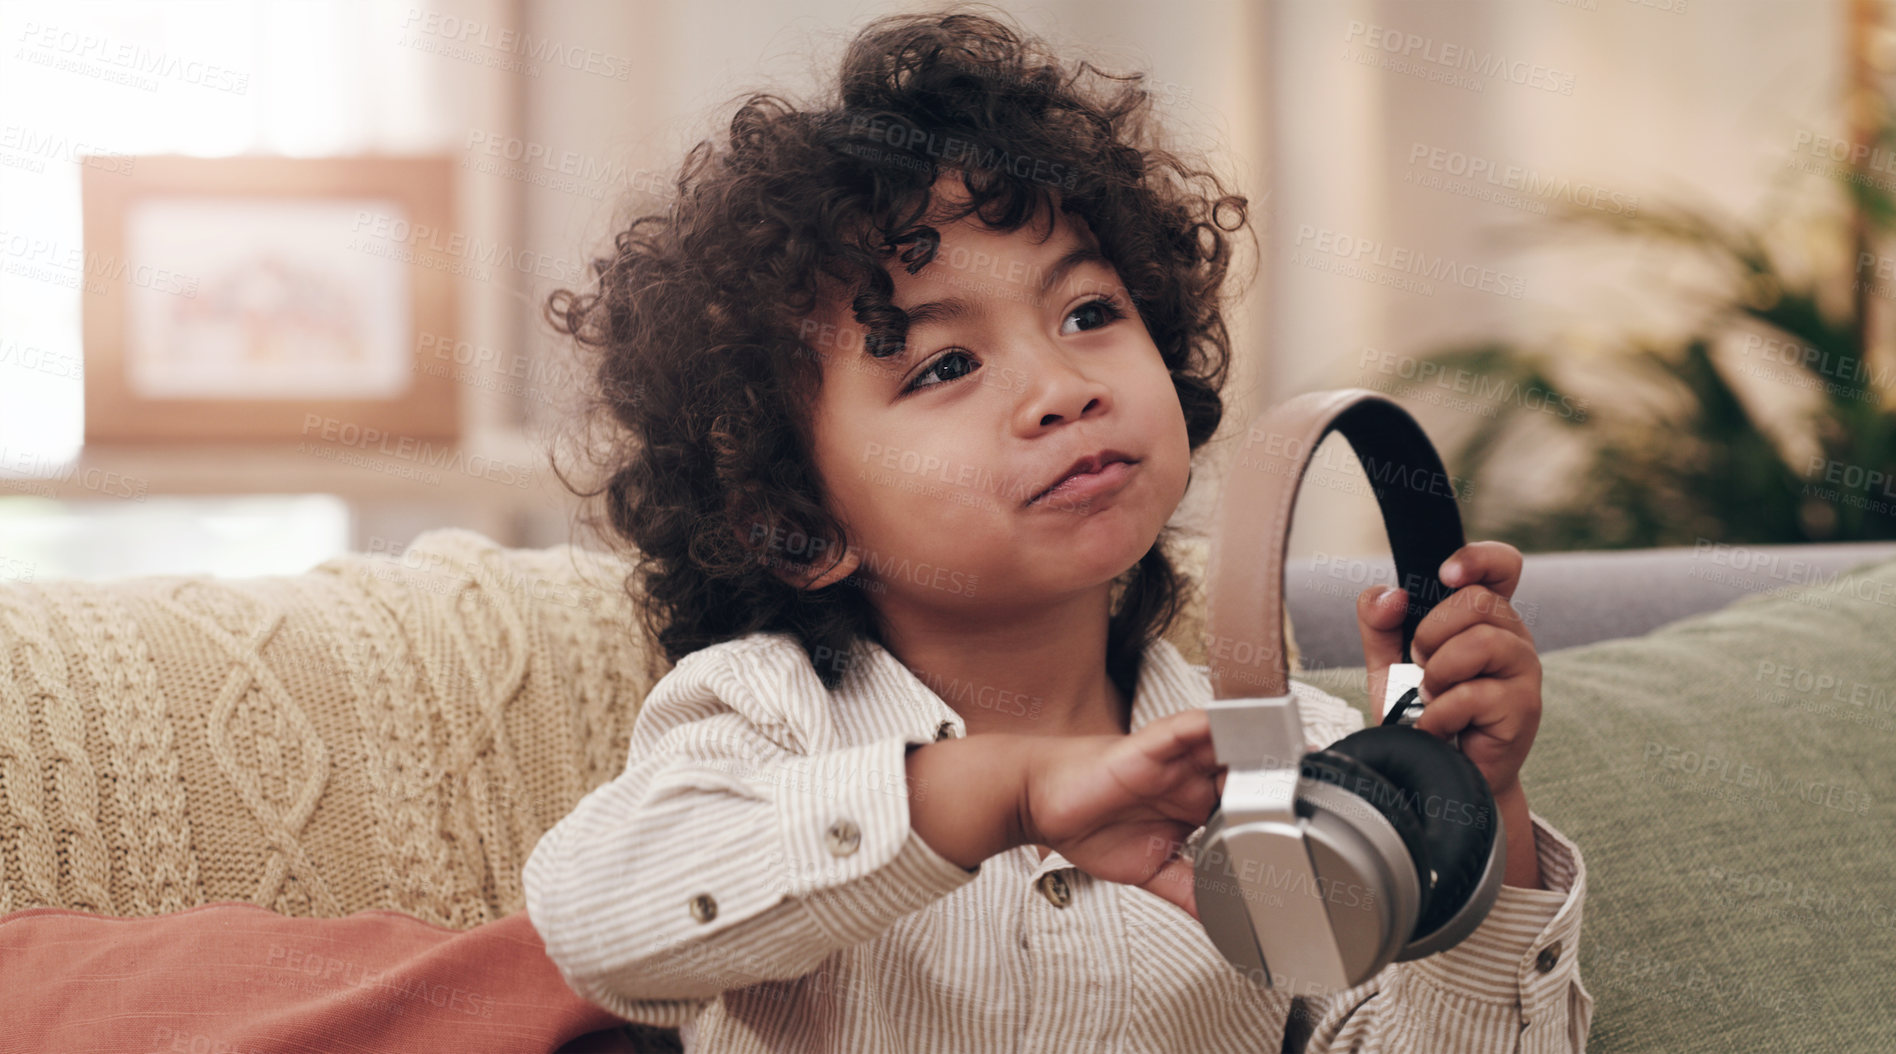 Buy stock photo Shot of an adorable little boy listening to music on headphones while sitting on a sofa at home